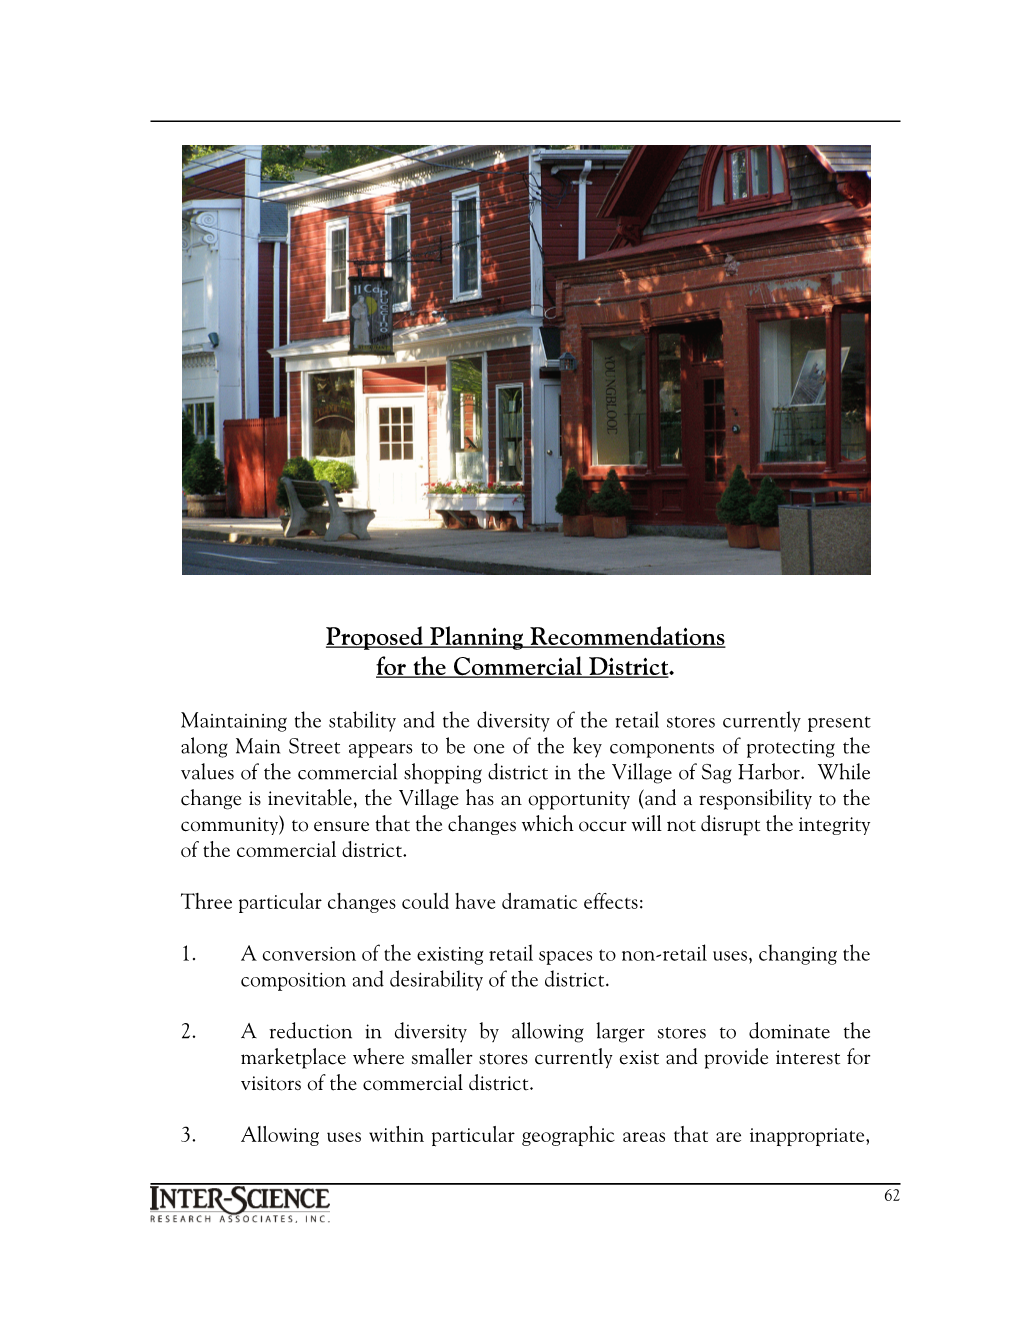 Proposed Planning Recommendations for the Commercial District